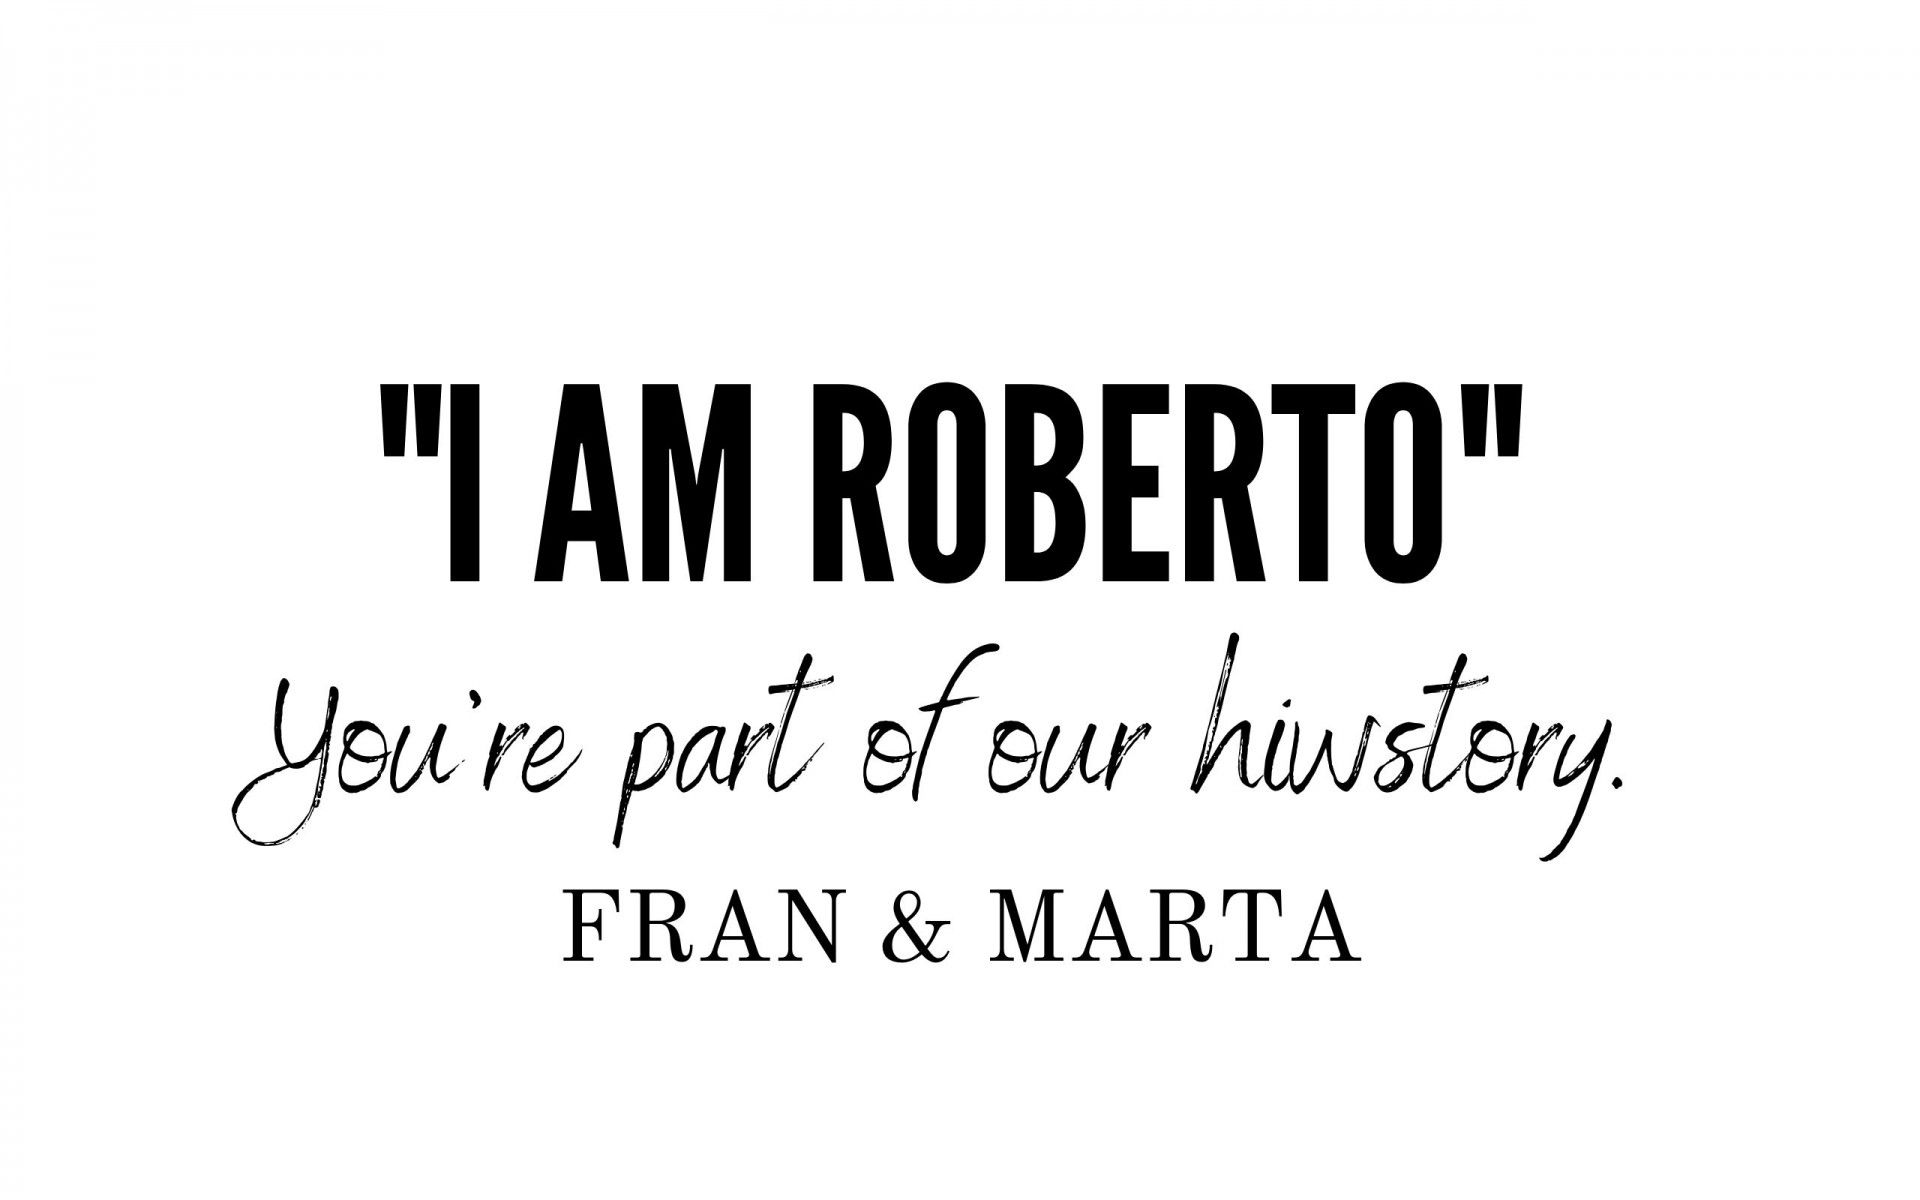 You are part of our history - Fran & Marta